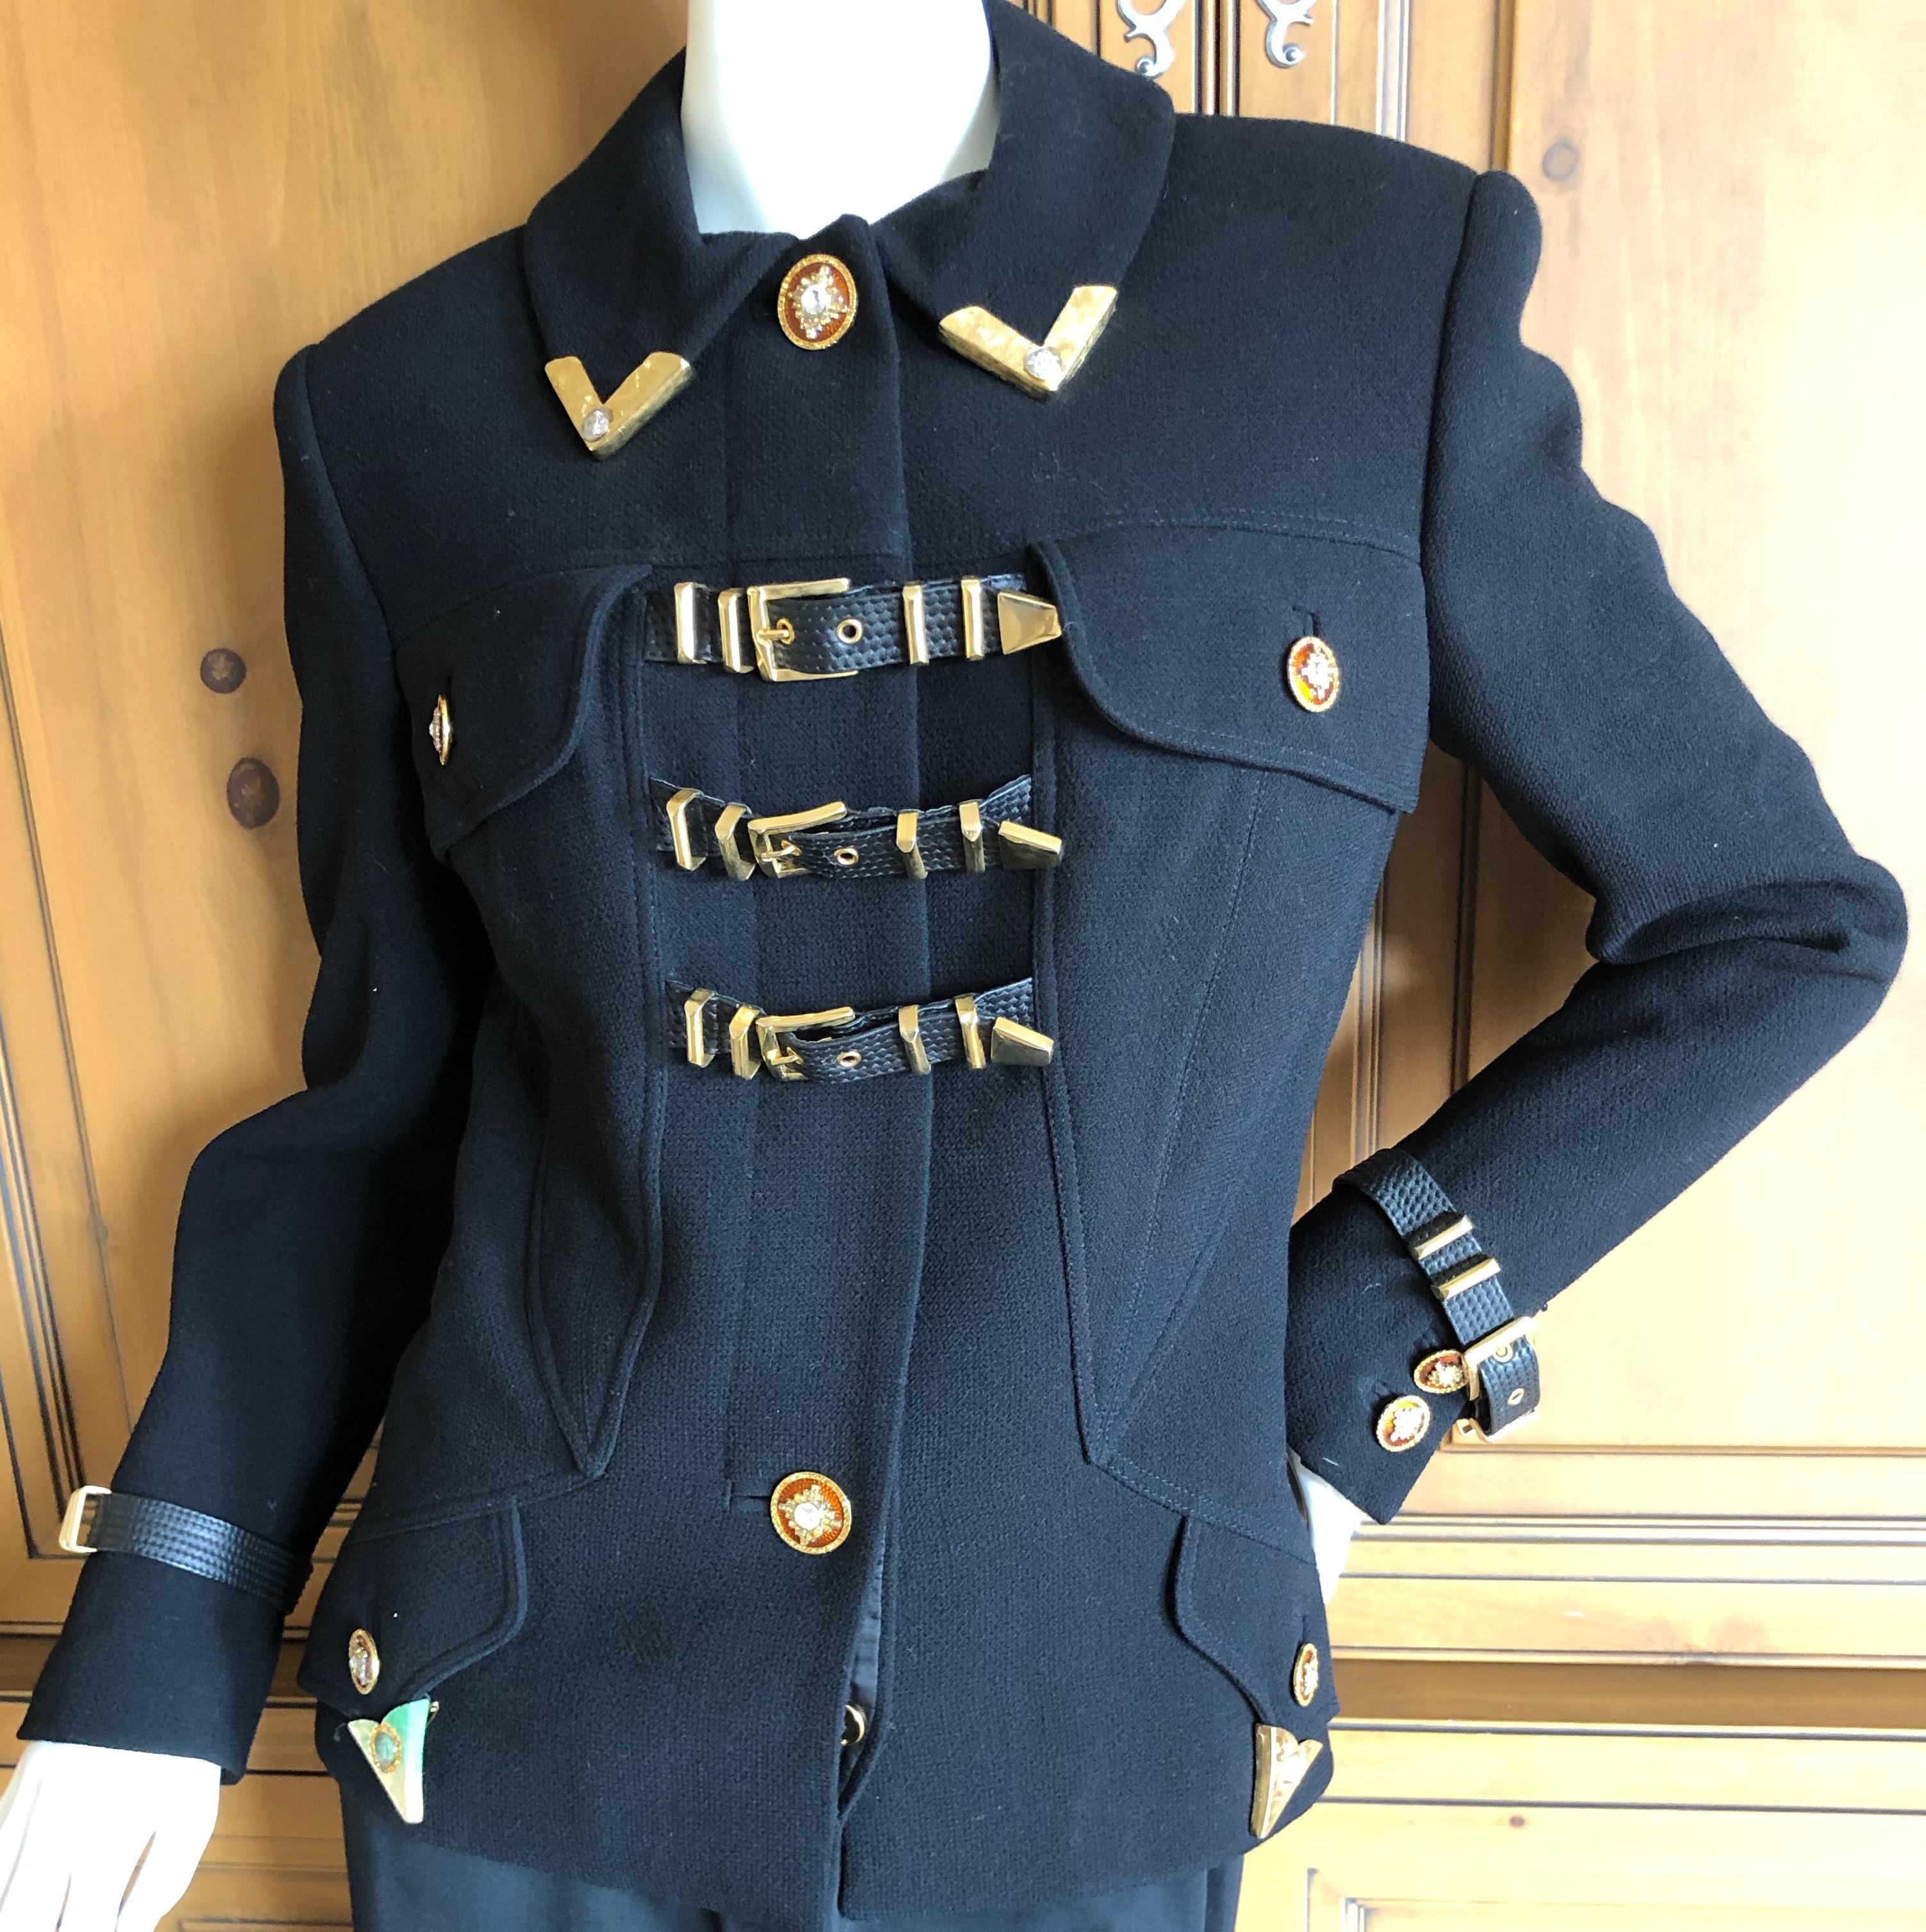 Women's Gianni Versace Iconic Fall 1992 Black Wool Jacket with Buckle Strap Closures